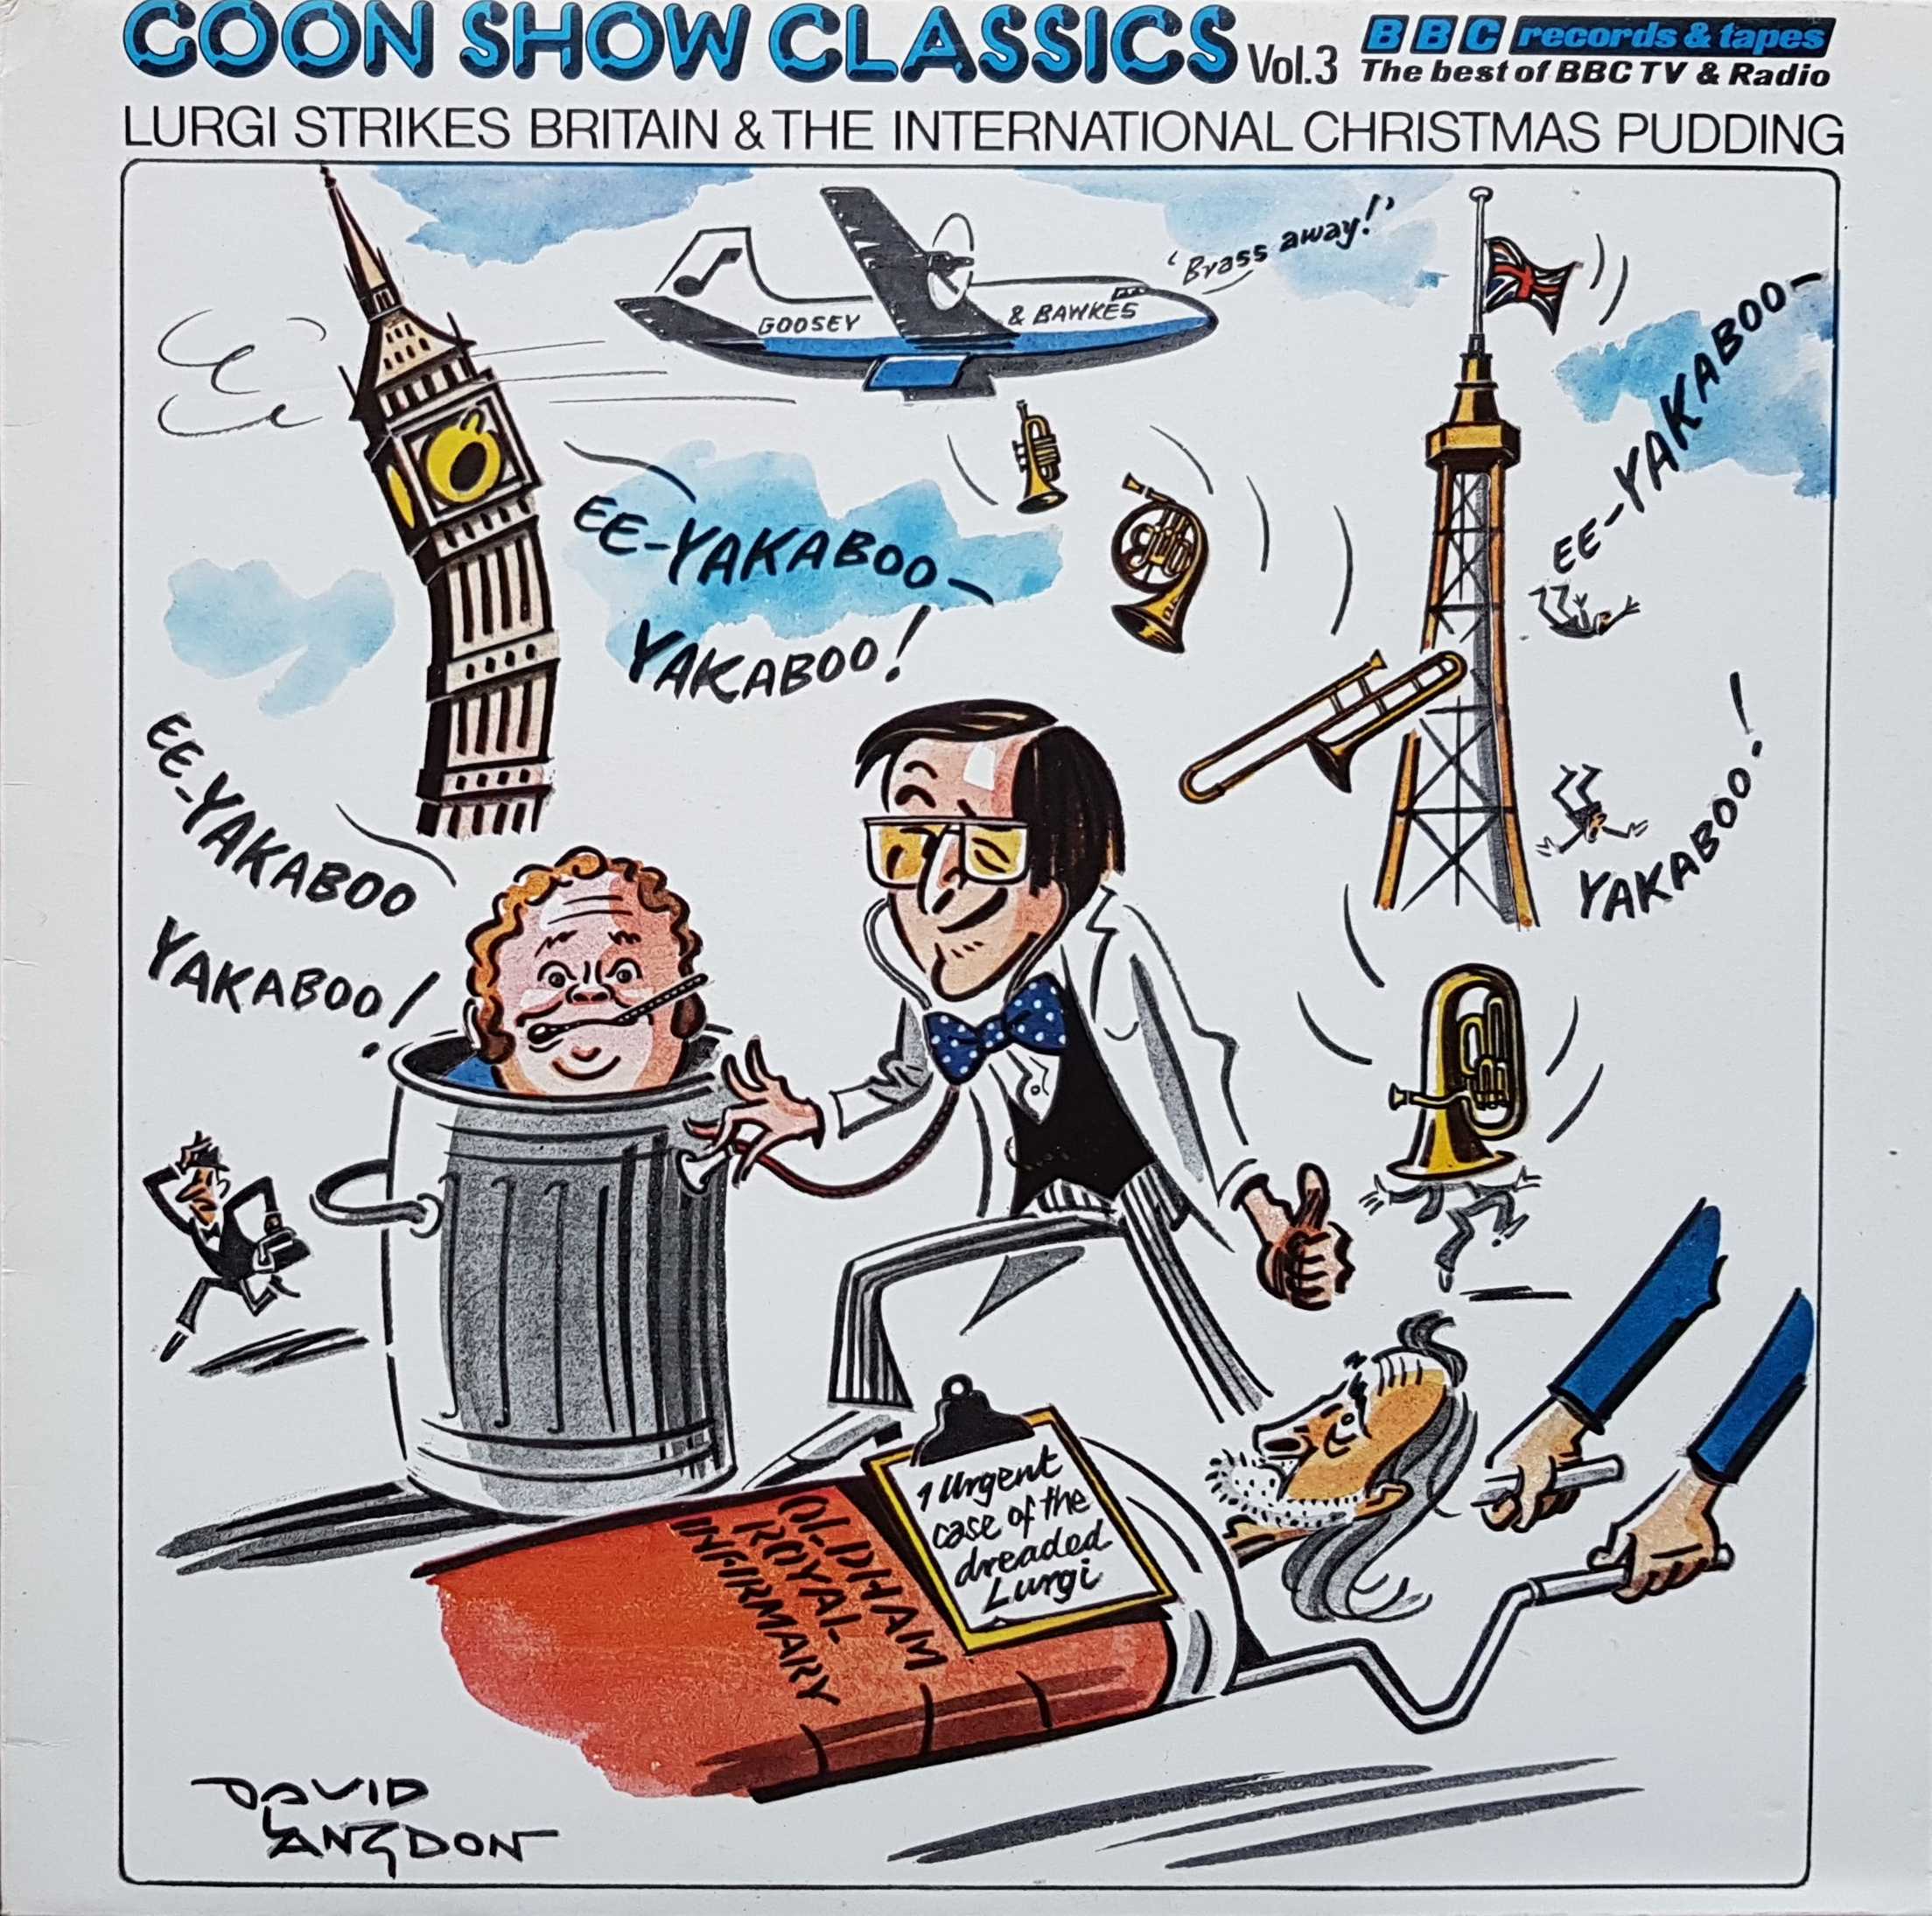 Picture of REB 246 Goon show classics - Volume 3 by artist Eric Sykes / Spike Milligan from the BBC albums - Records and Tapes library